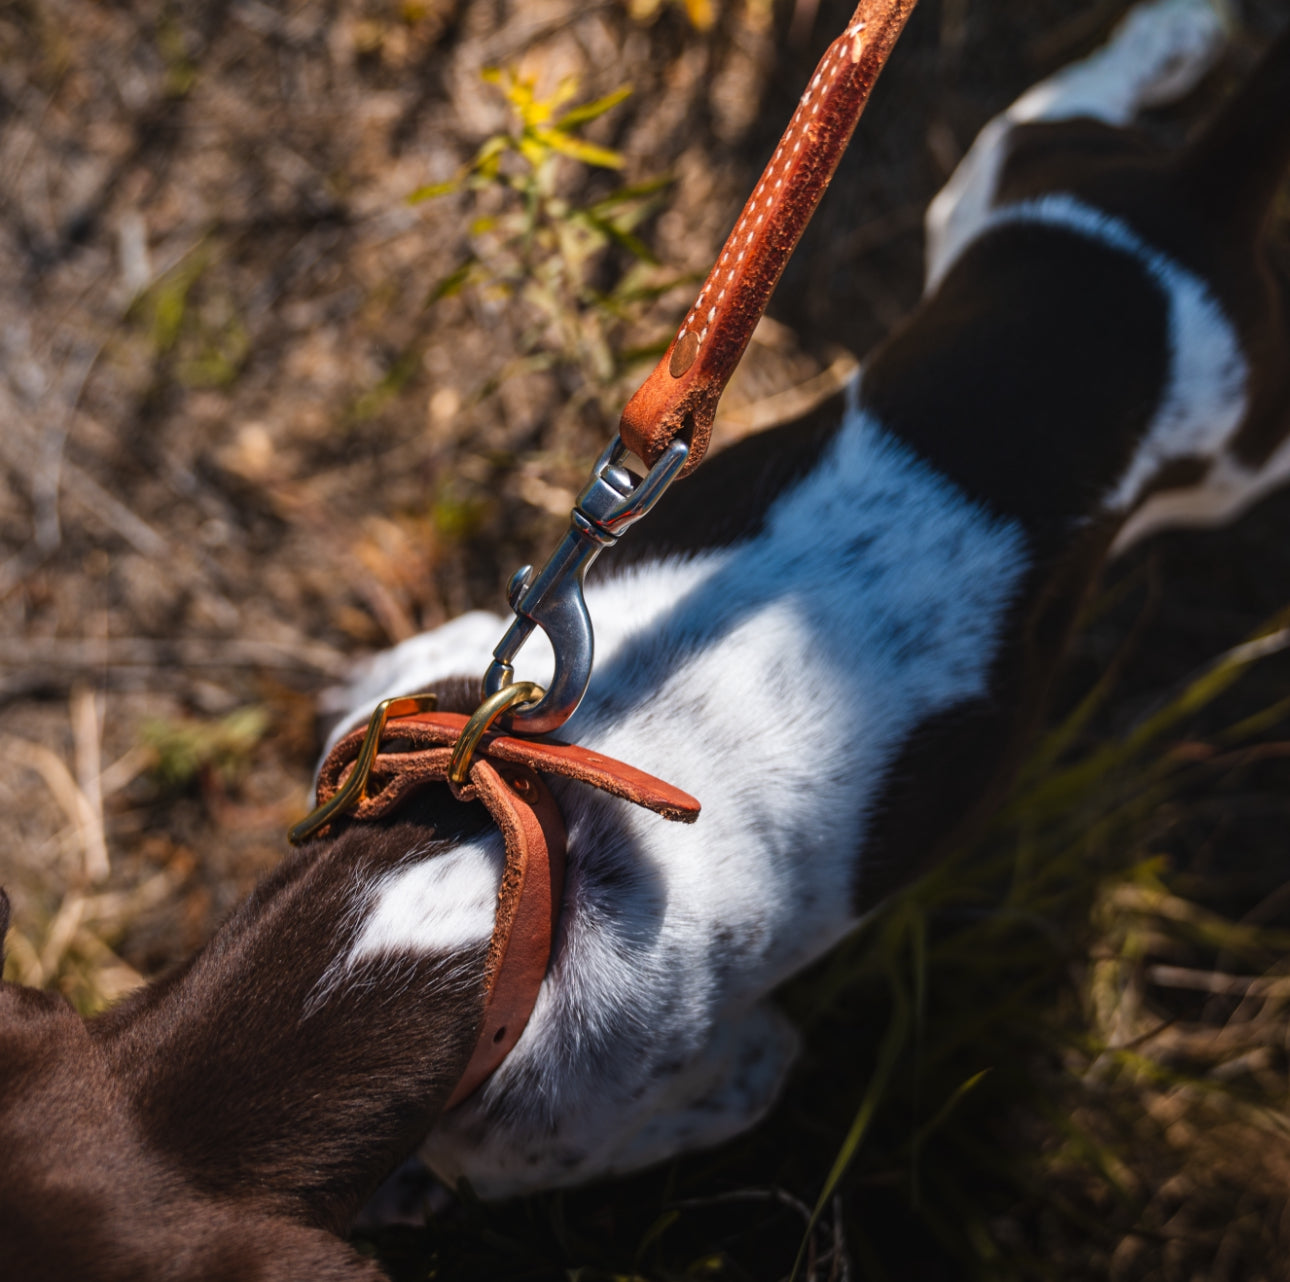 Premium Handcrafted 4' Leather Dog Leash - Durable & Stylish for Outdoor Adventures